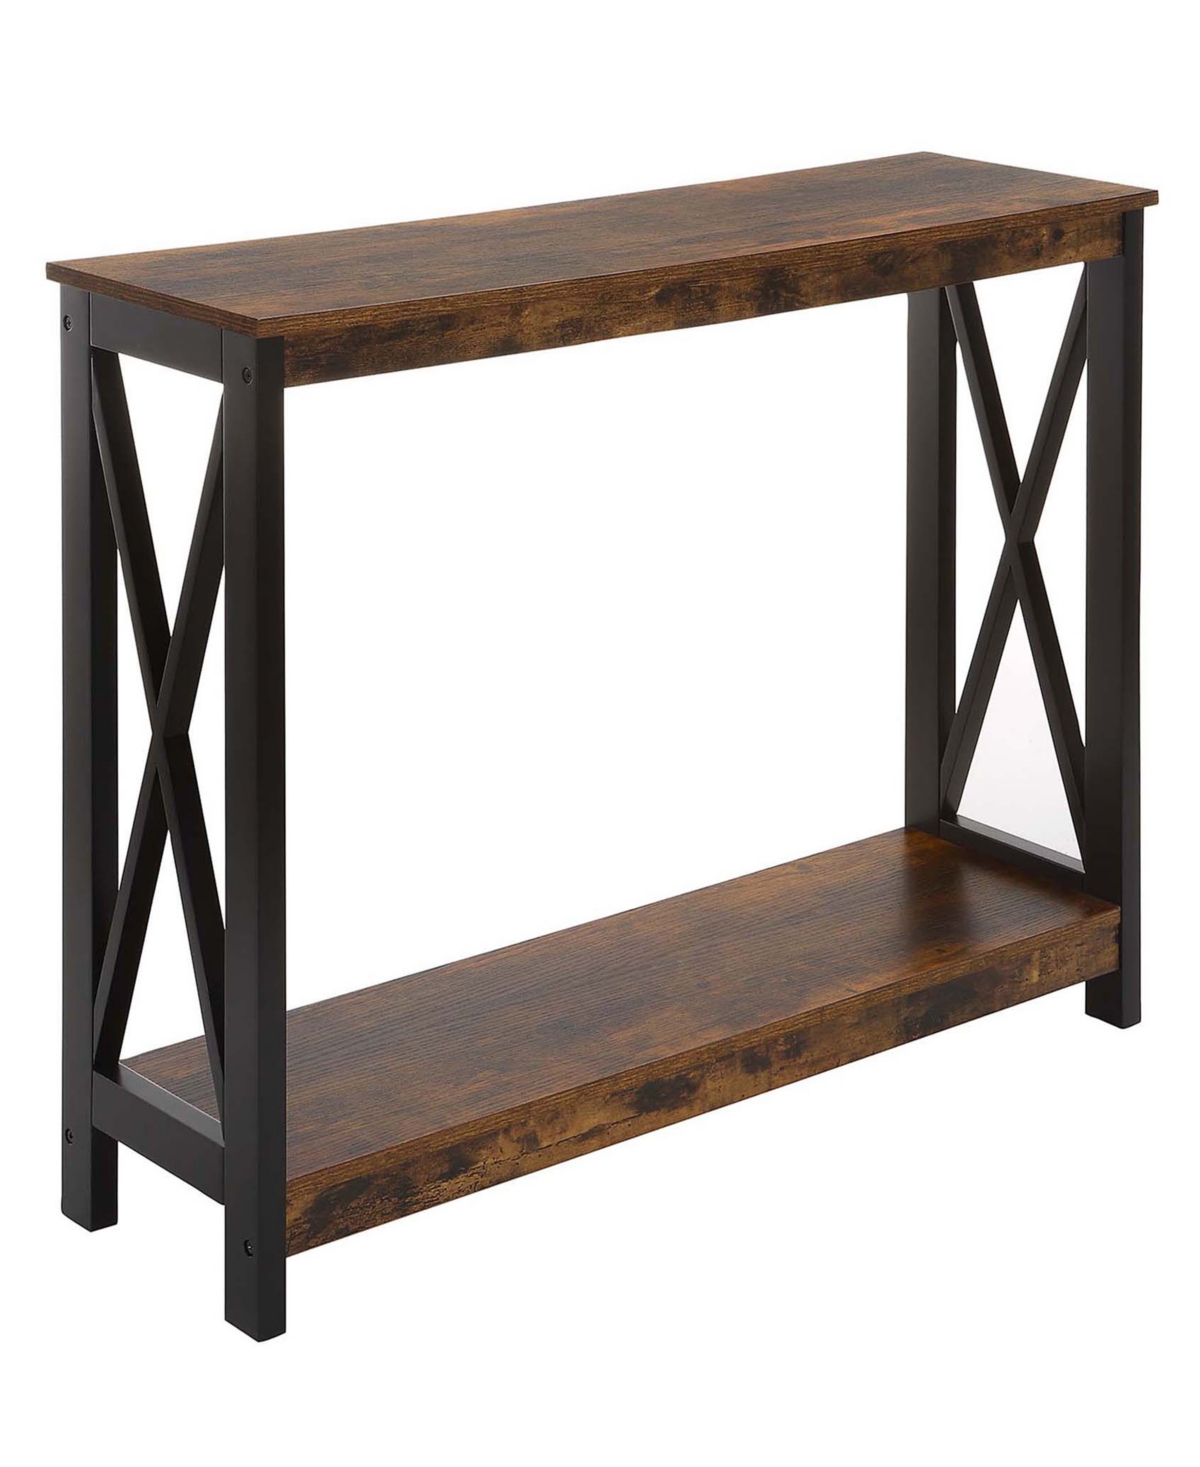 Convenience Concepts 39.5" Mdf Oxford Console Table With Shelf In Barnwood,black